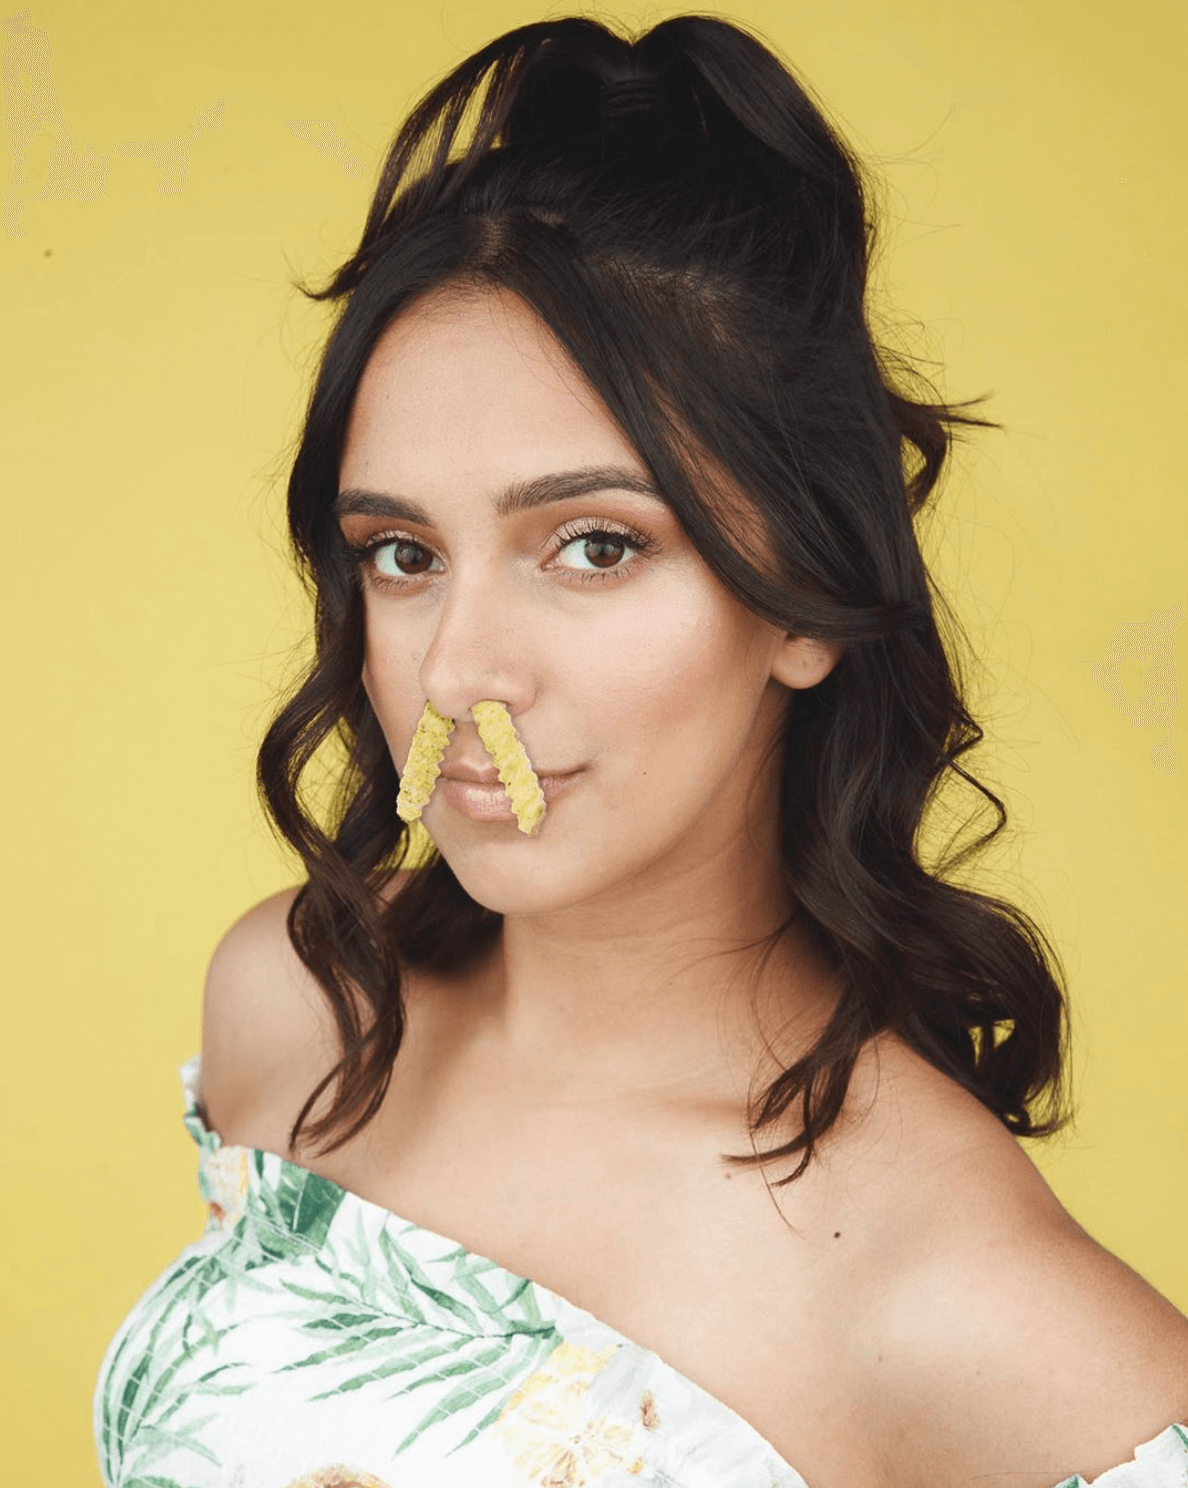 Woman's Portrait, French Fries in nose - Madeline Khare, advertising smu